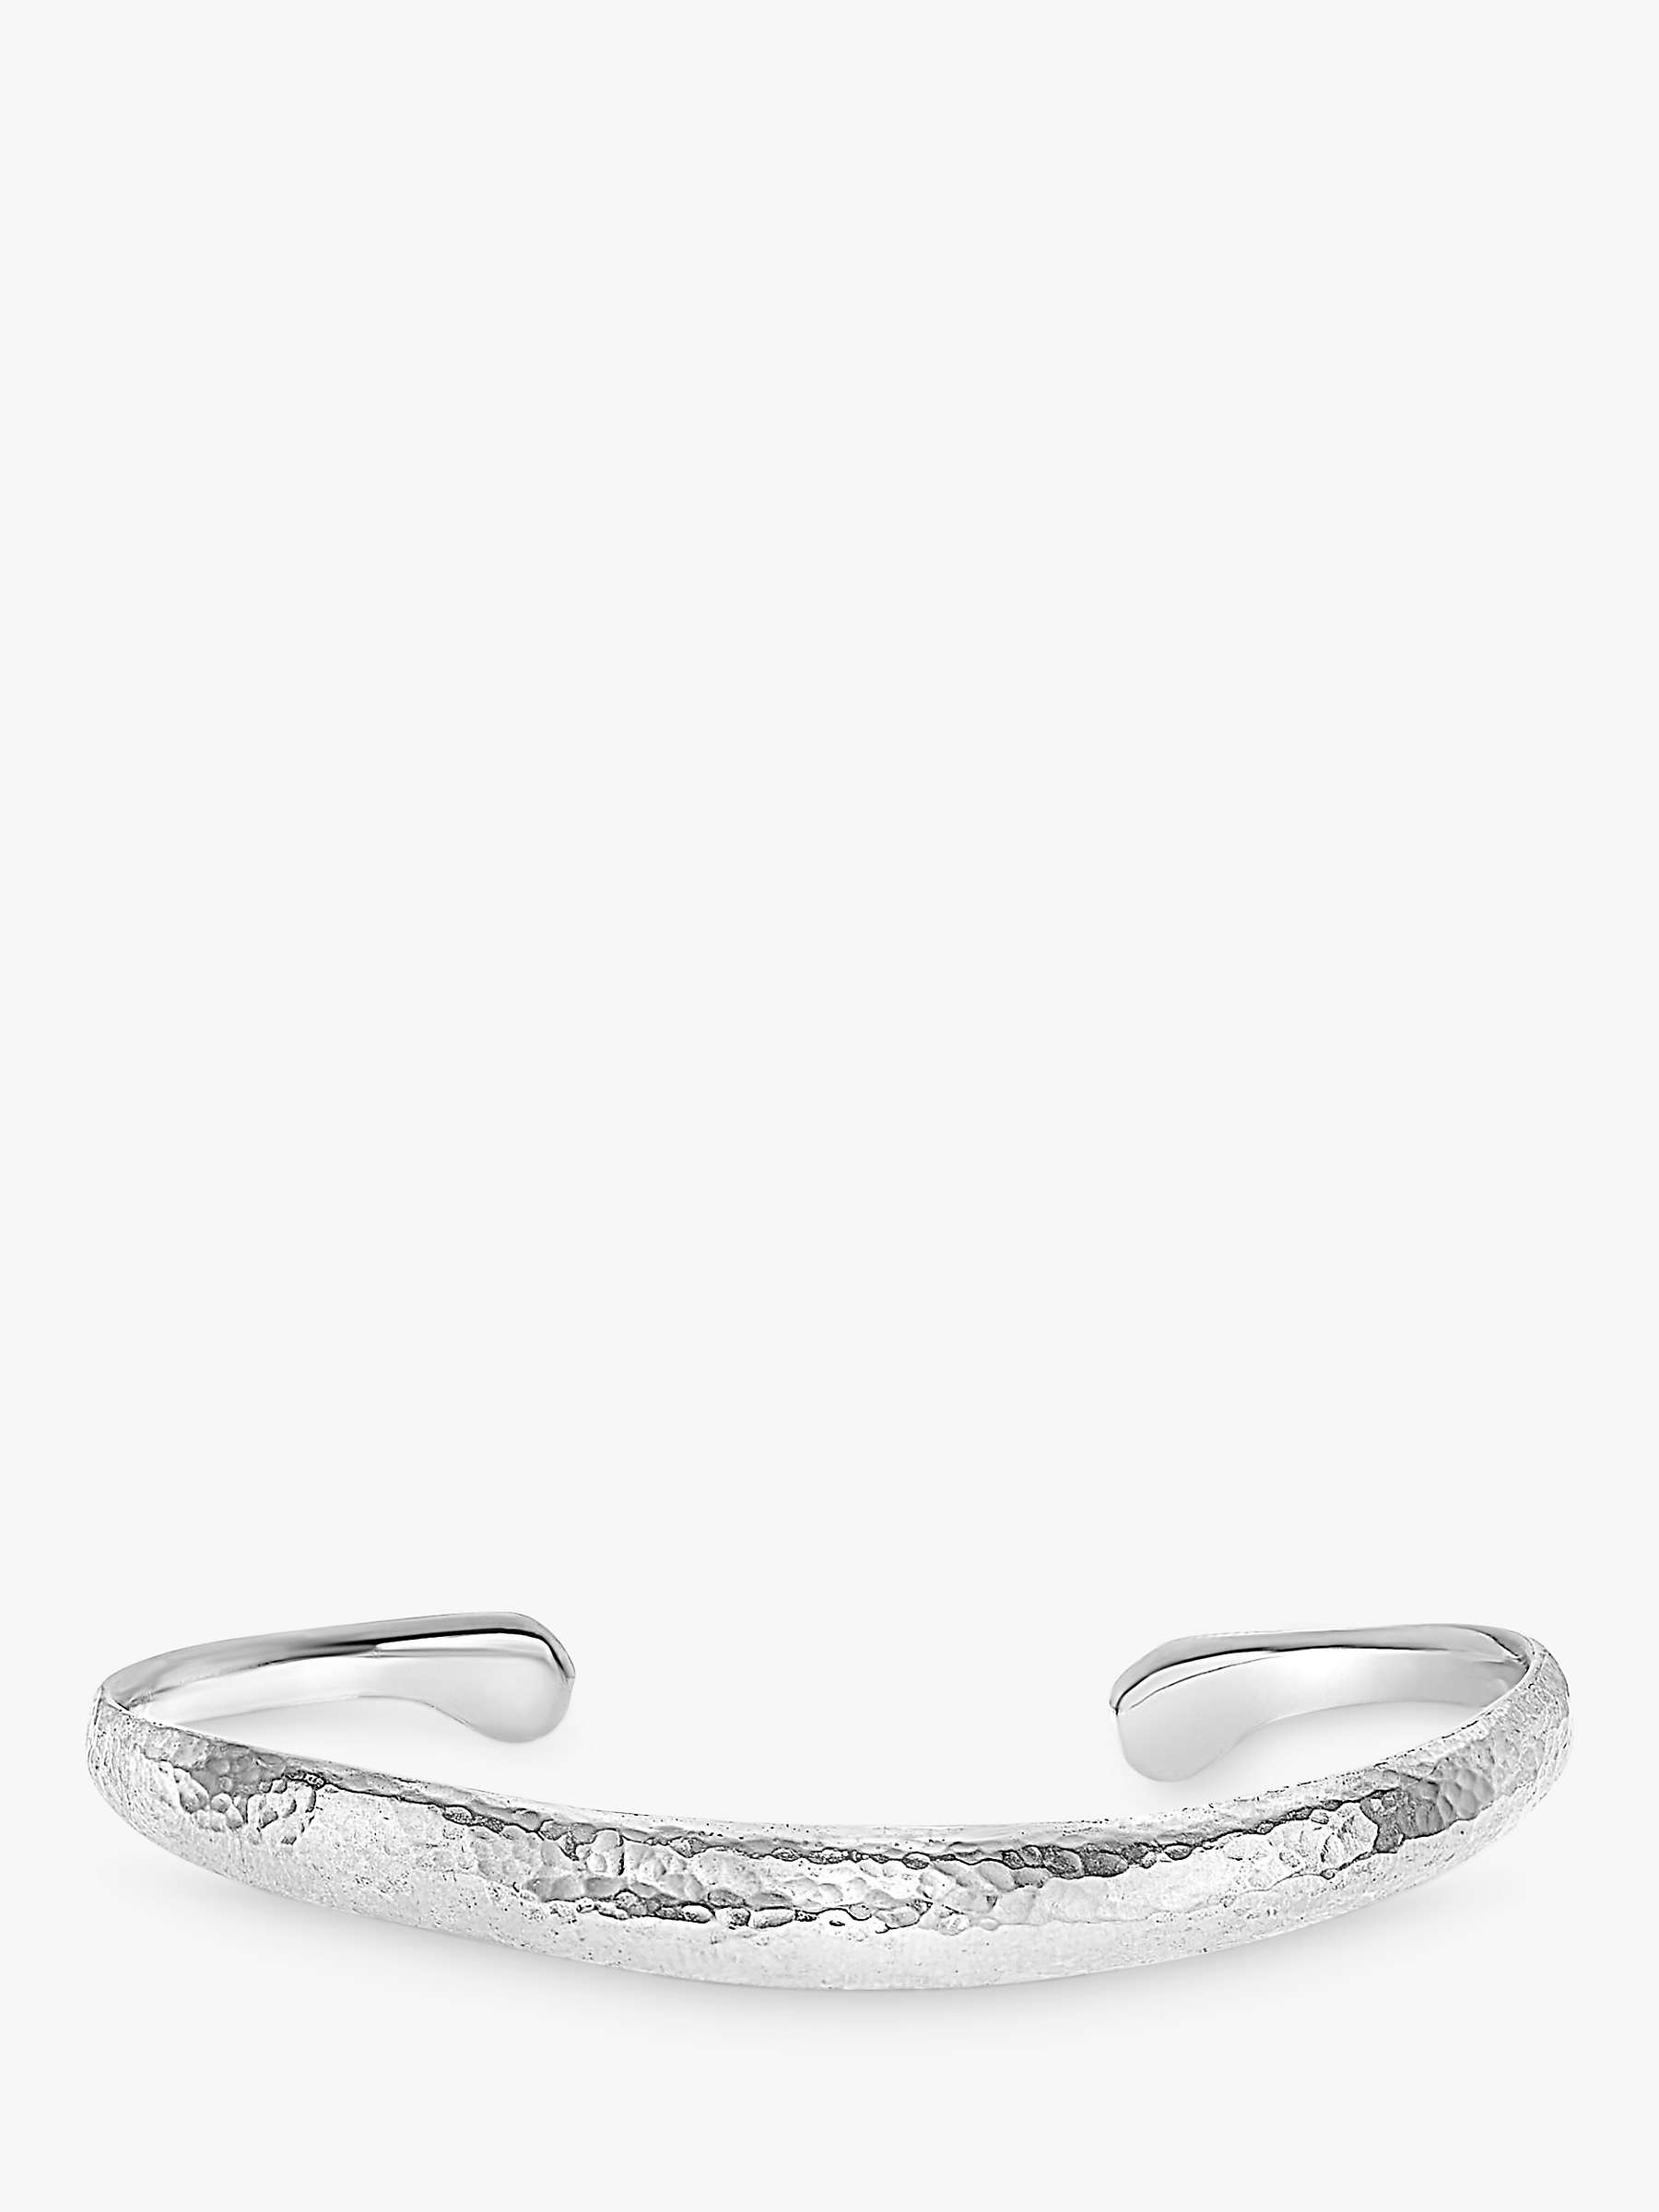 Buy Dower & Hall Sterling Silver Curved Torque Bangle, Silver Online at johnlewis.com